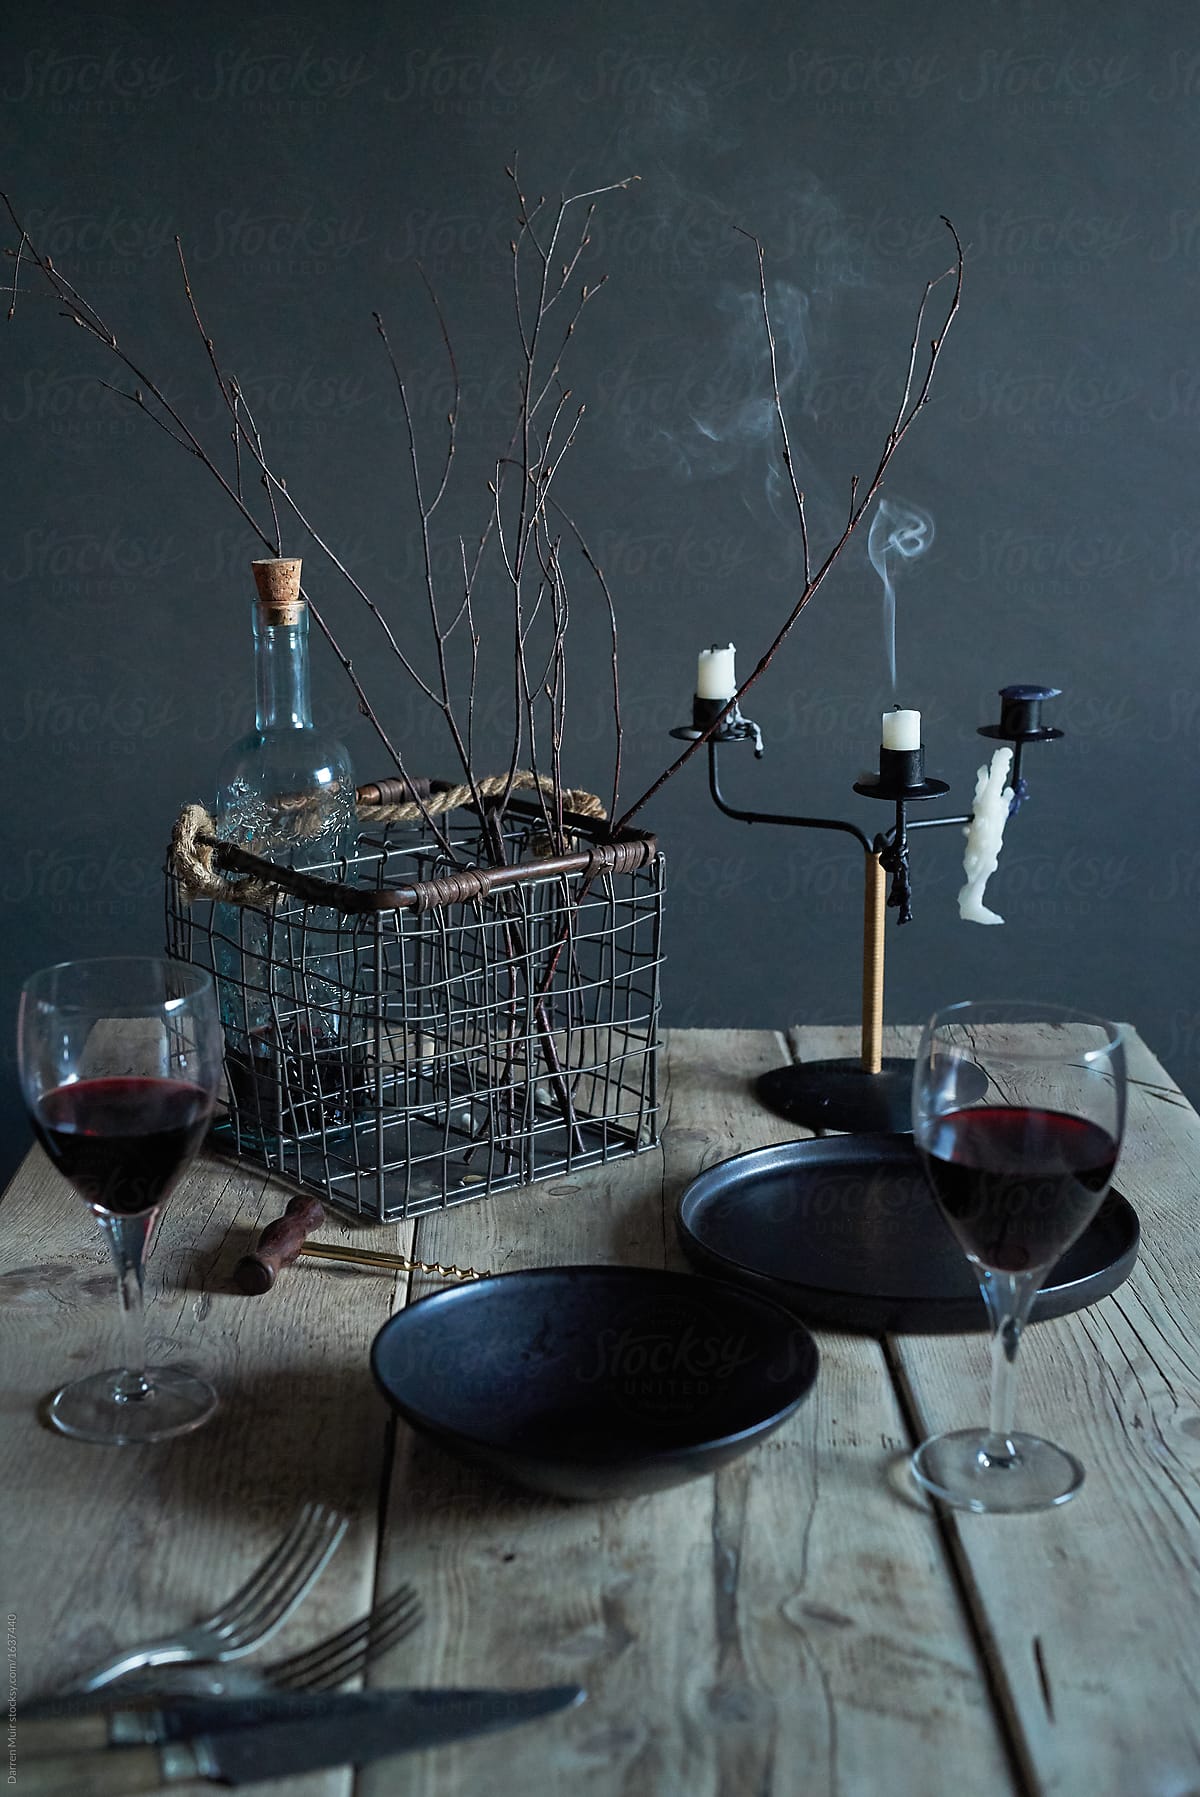 Couple of glasses of wine on a rustic wooden table scape.